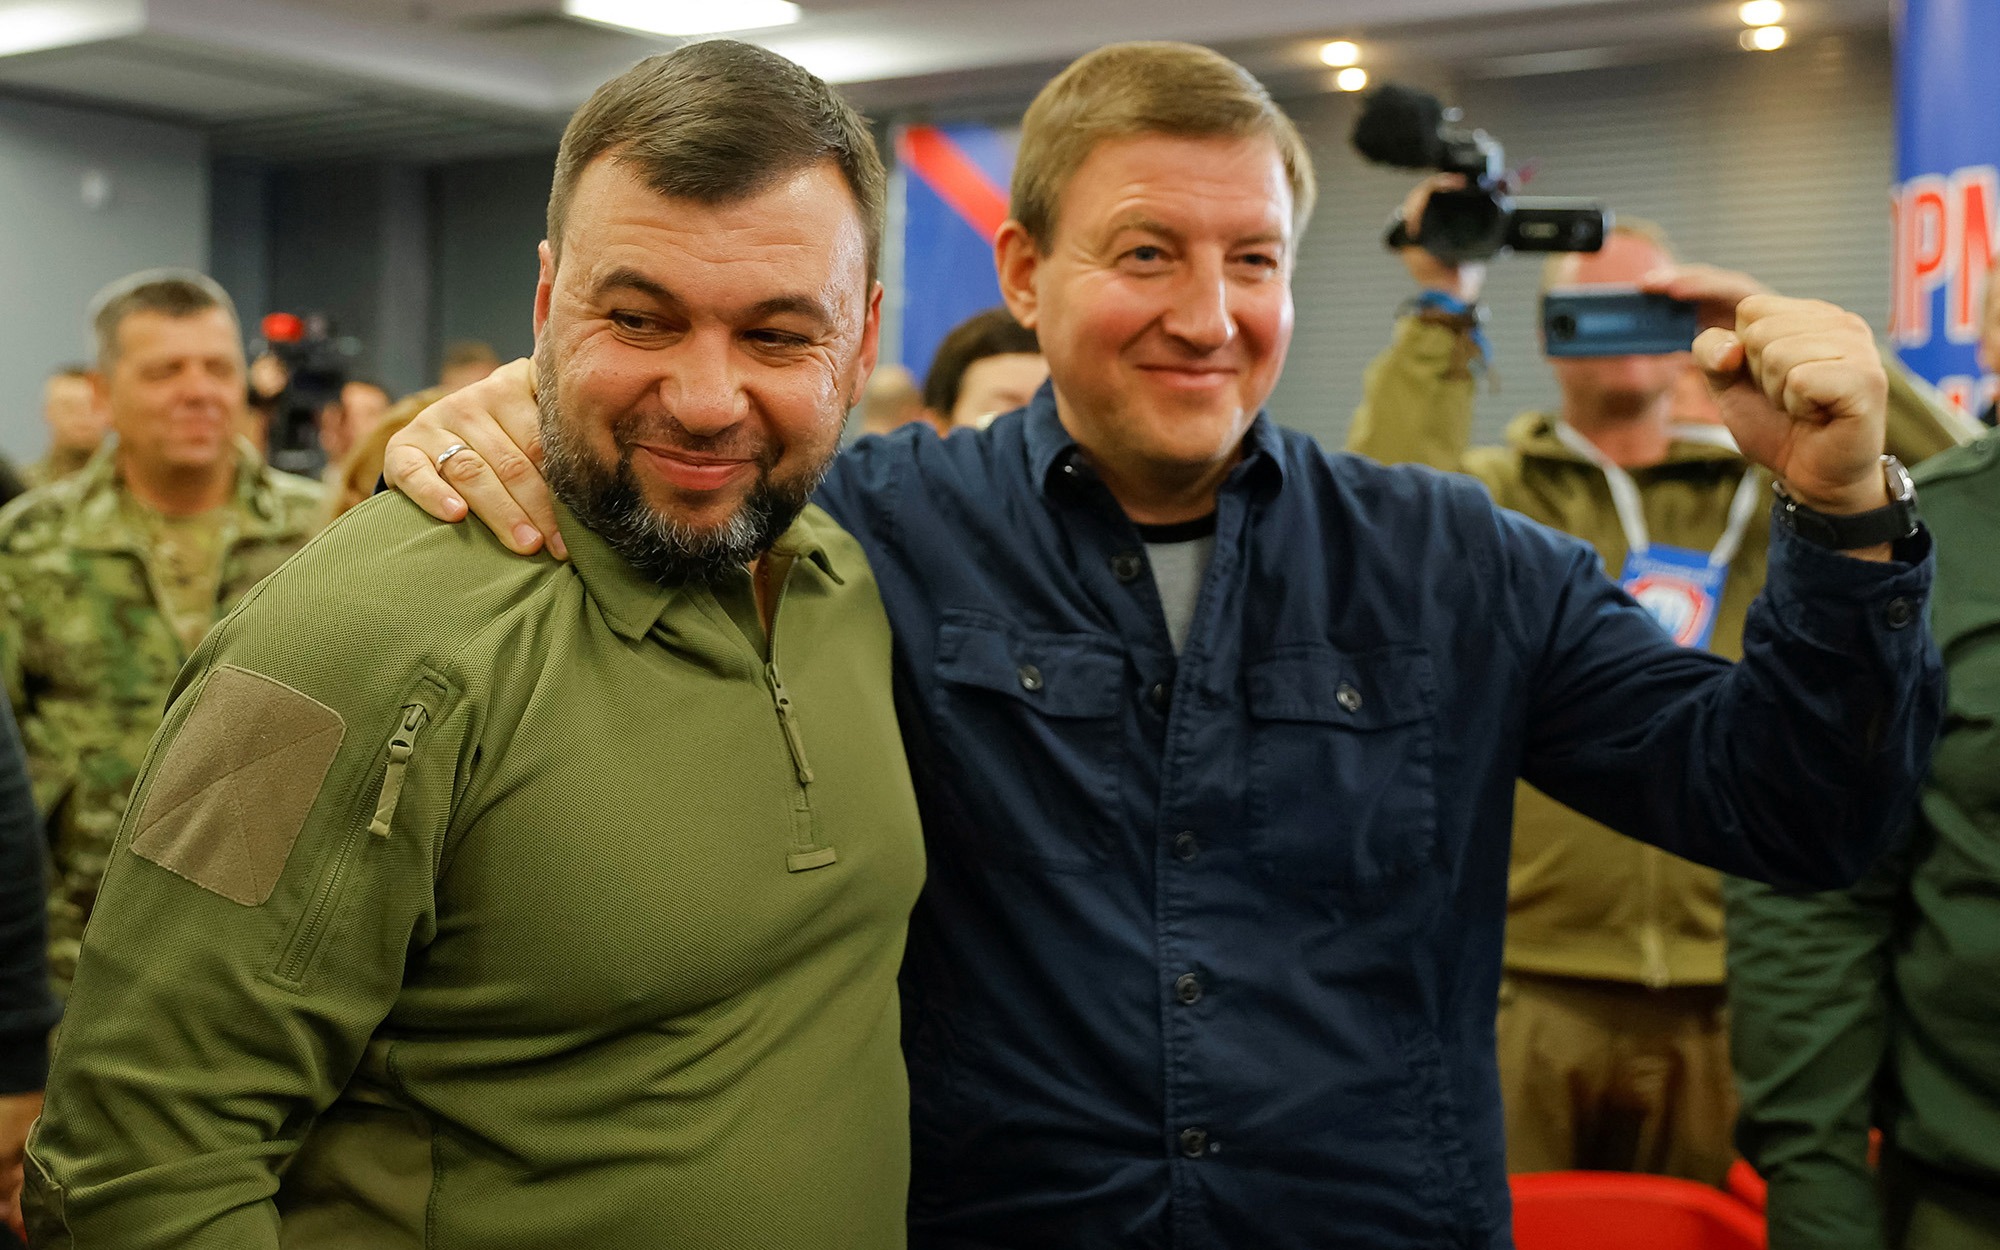 Head of the separatist self-proclaimed Donetsk People's Republic Denis Pushilin, left, and Secretary of the United Russia Party's General Council Andrey Turchak attend a news conference on preliminary results of a referendum on the joining of the self-proclaimed Donetsk People's Republic (DPR) to Russia, in Donetsk, Ukraine, on September 27.